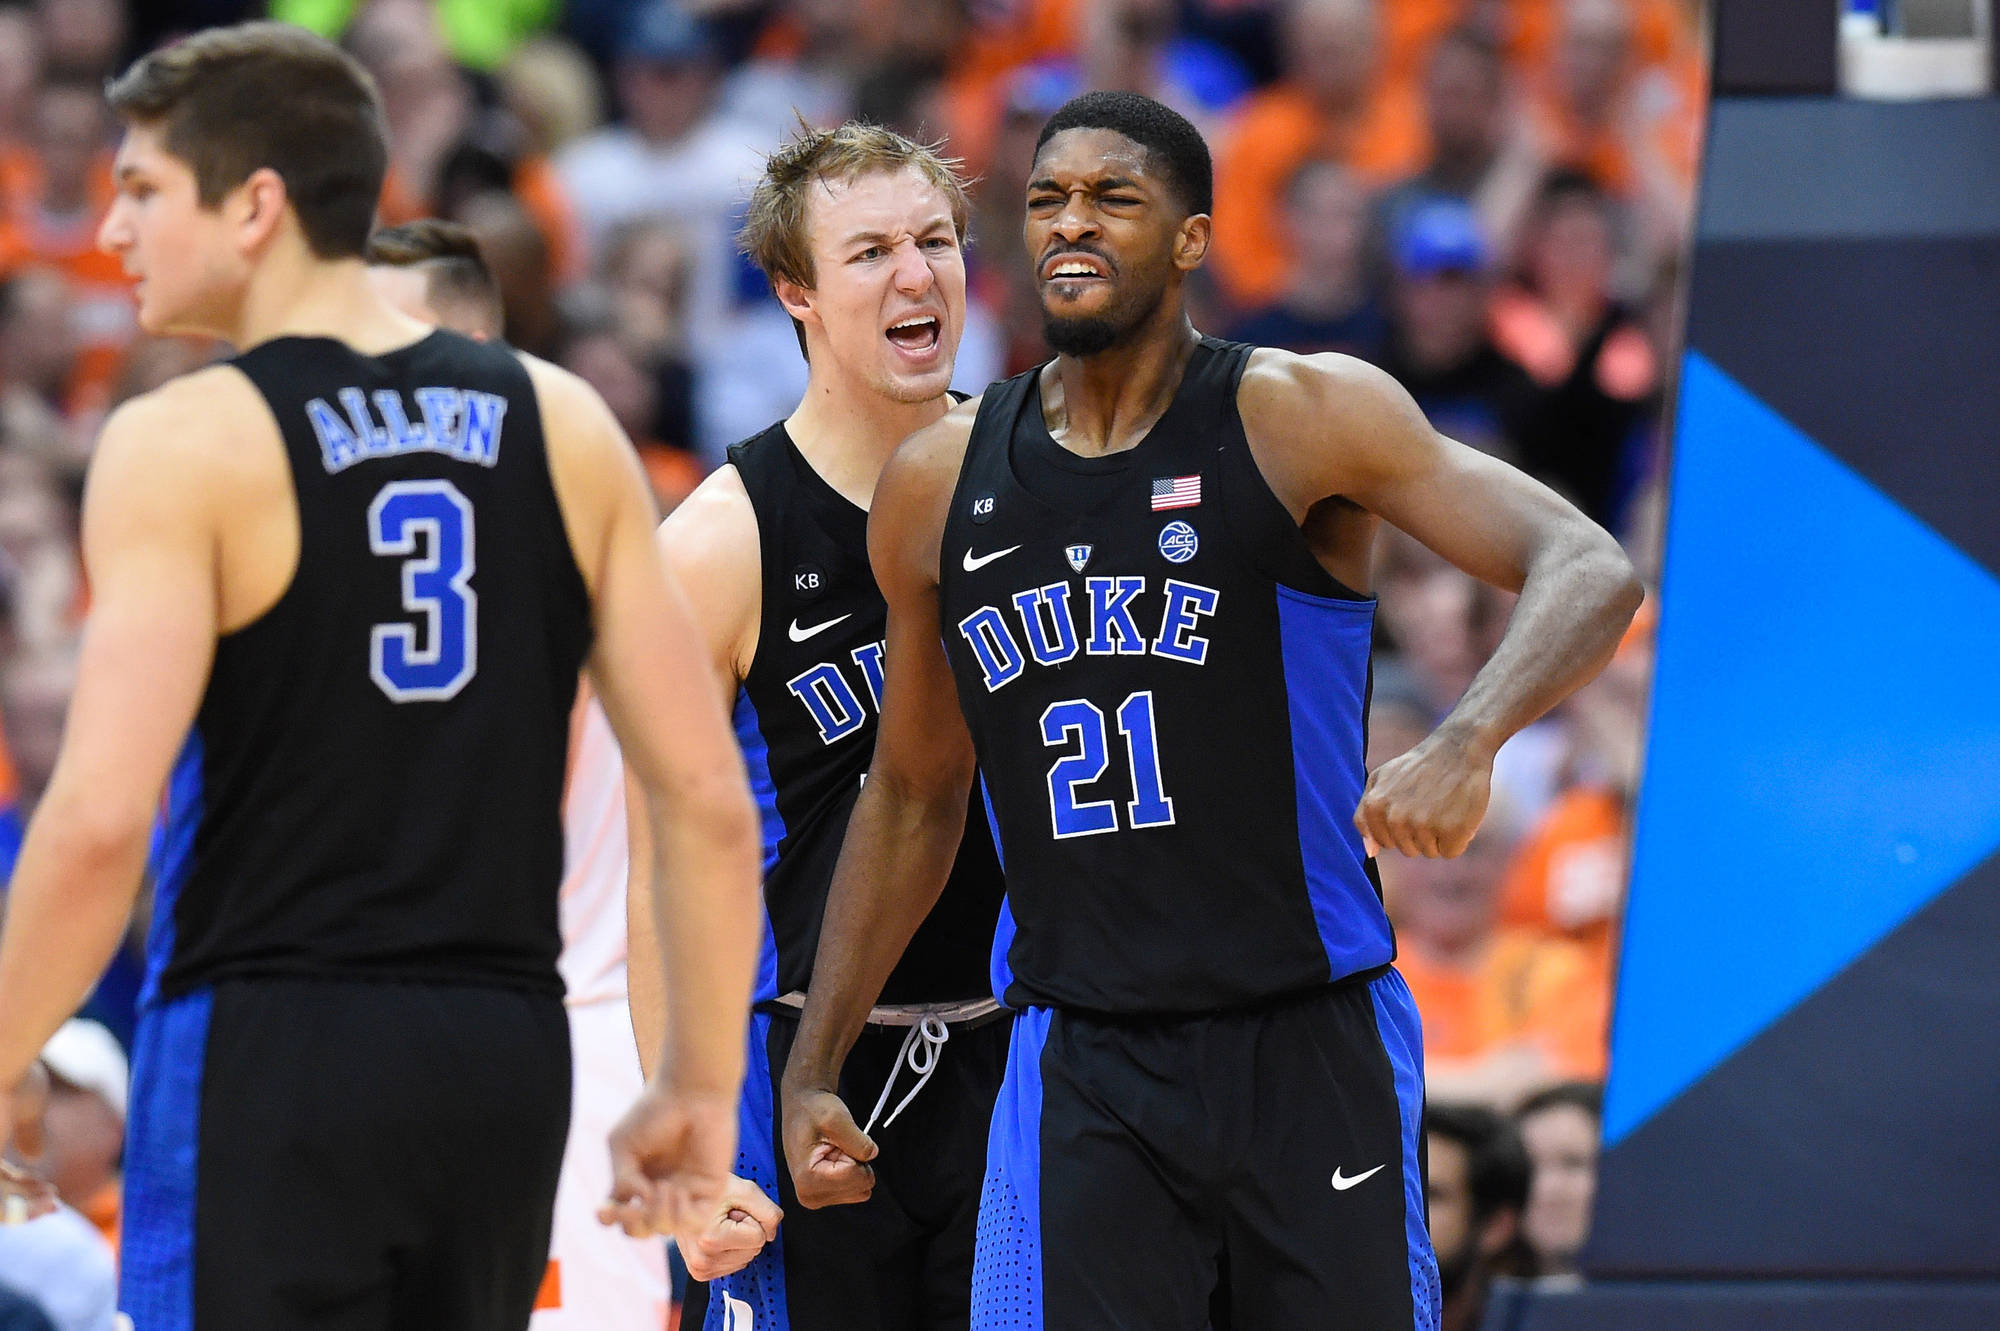 Duke poised for another magical March